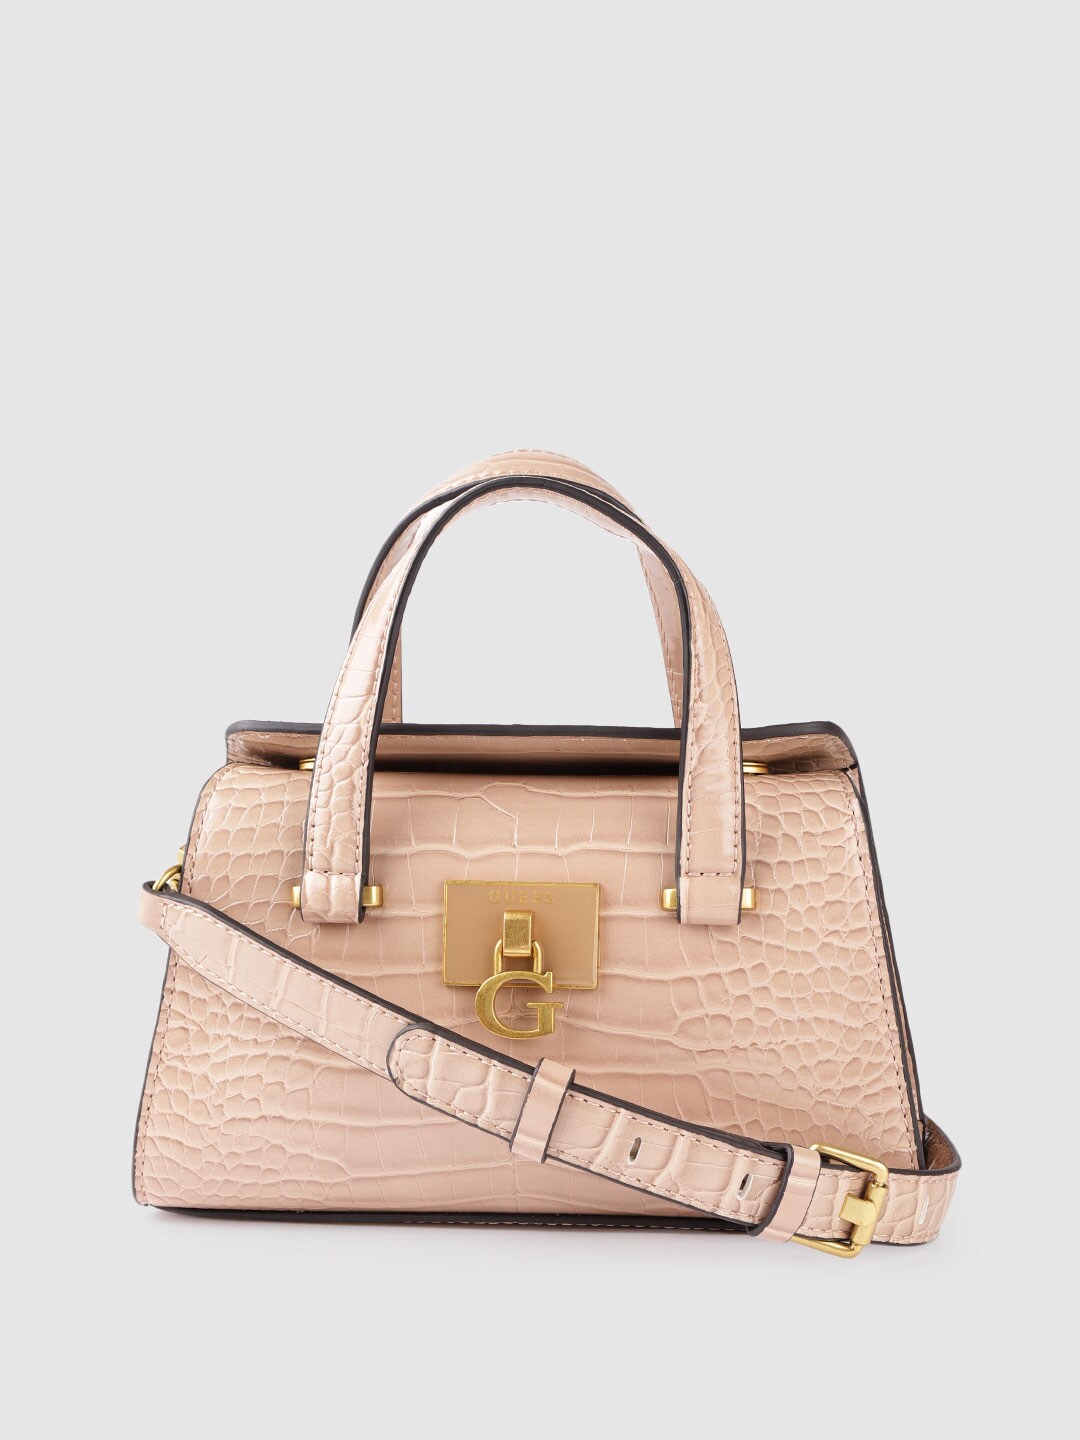 GUESS Peach-Coloured Croc Textured Structured Handheld Bag with Detachable Strap Price in India